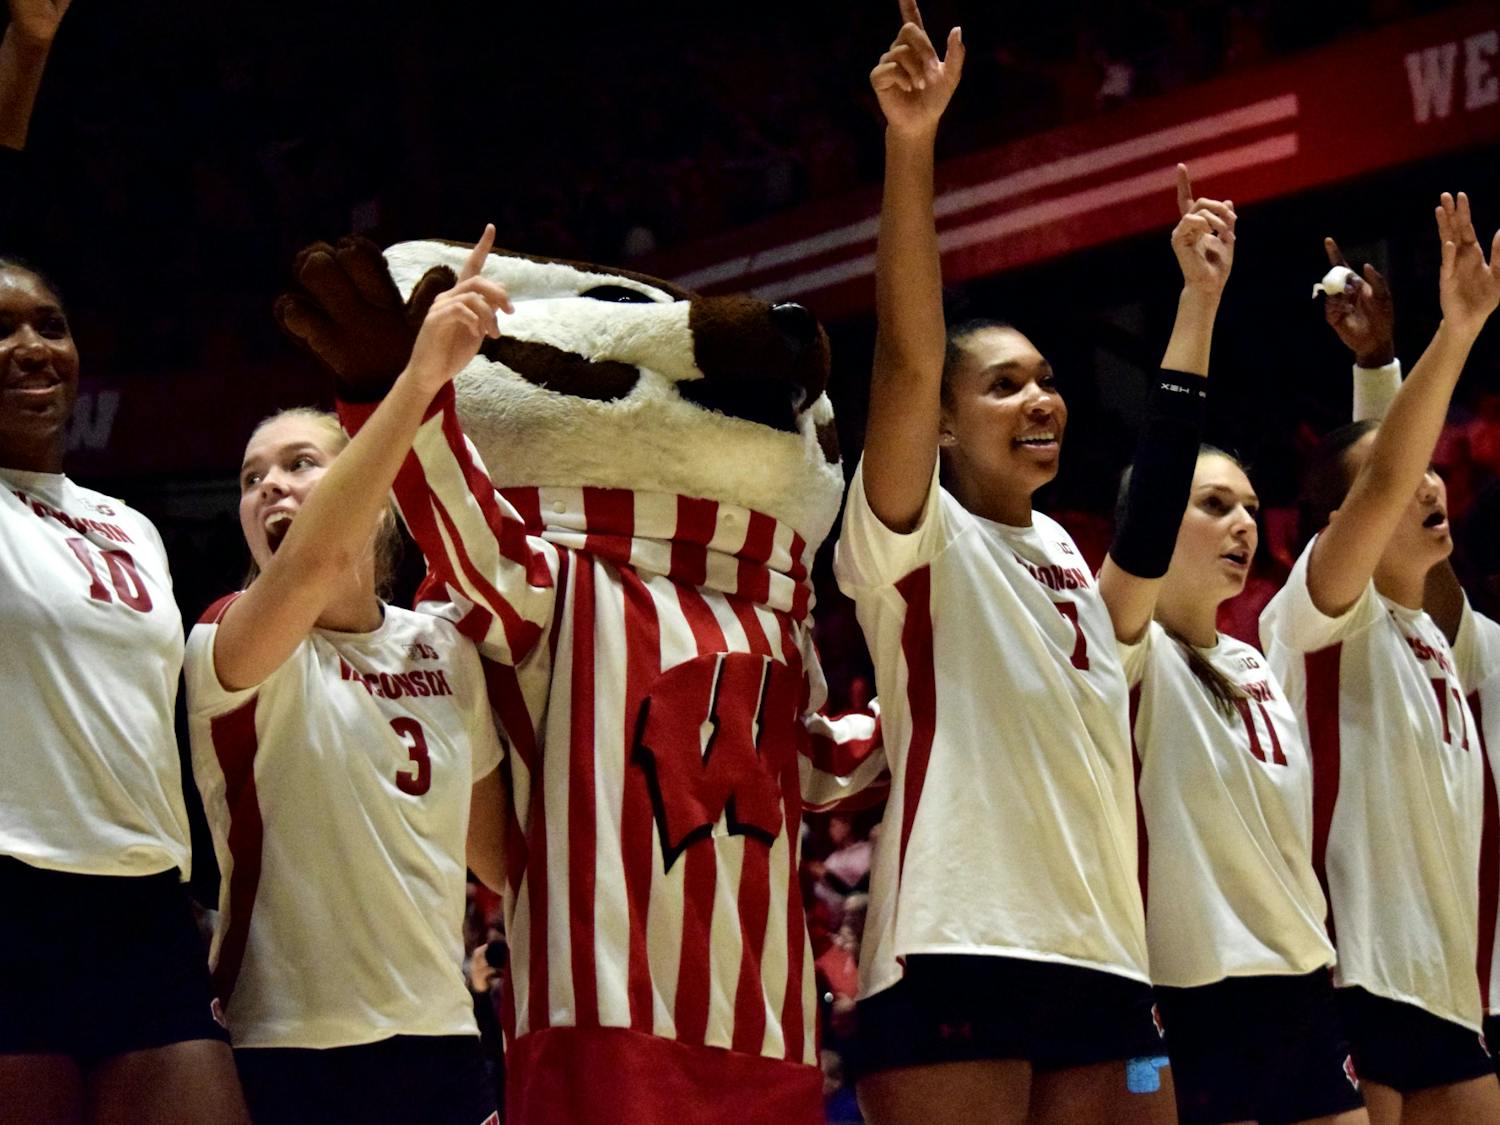 PHOTOS: Badgers Volleyball continue their winning streak after beating UMiami 